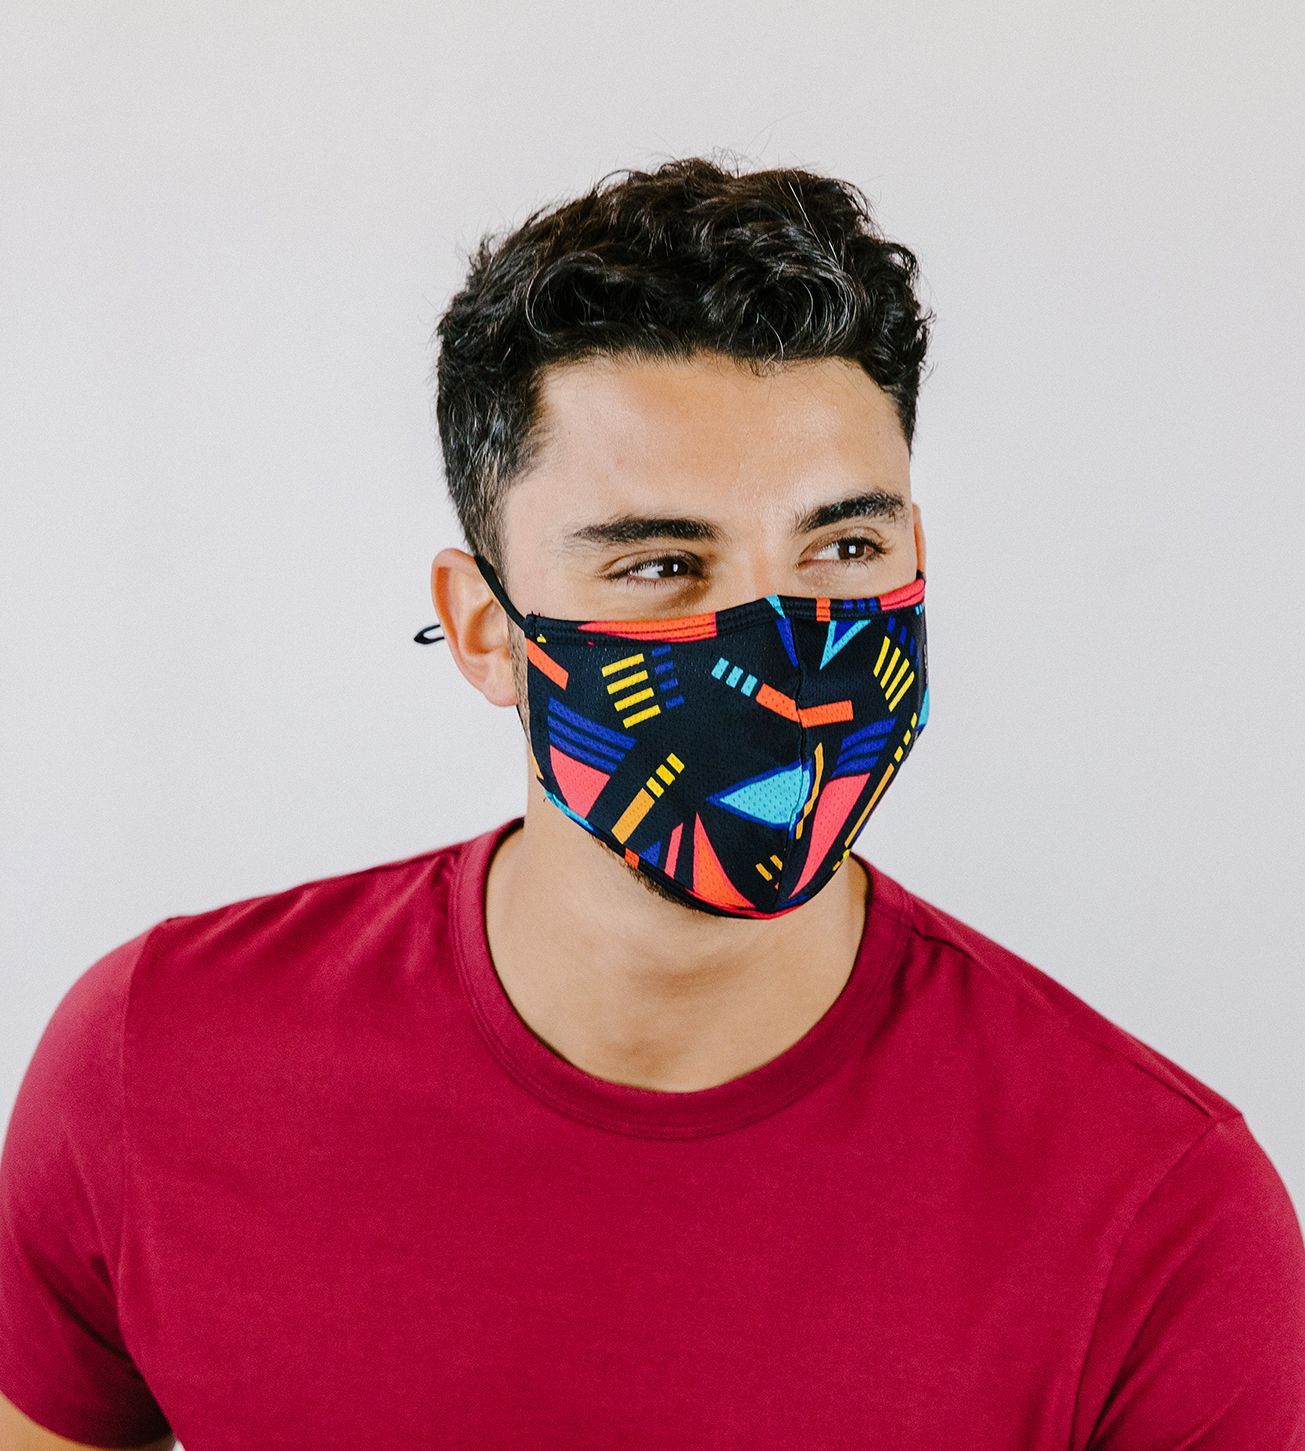 Blue/Black Reusable Masks 3 Pack contains colors Gains boro, Maroon, Indian red, Fire brick, Black, Rosy brown, Tan, Dark olive green, Medium turquoise, Midnight blue